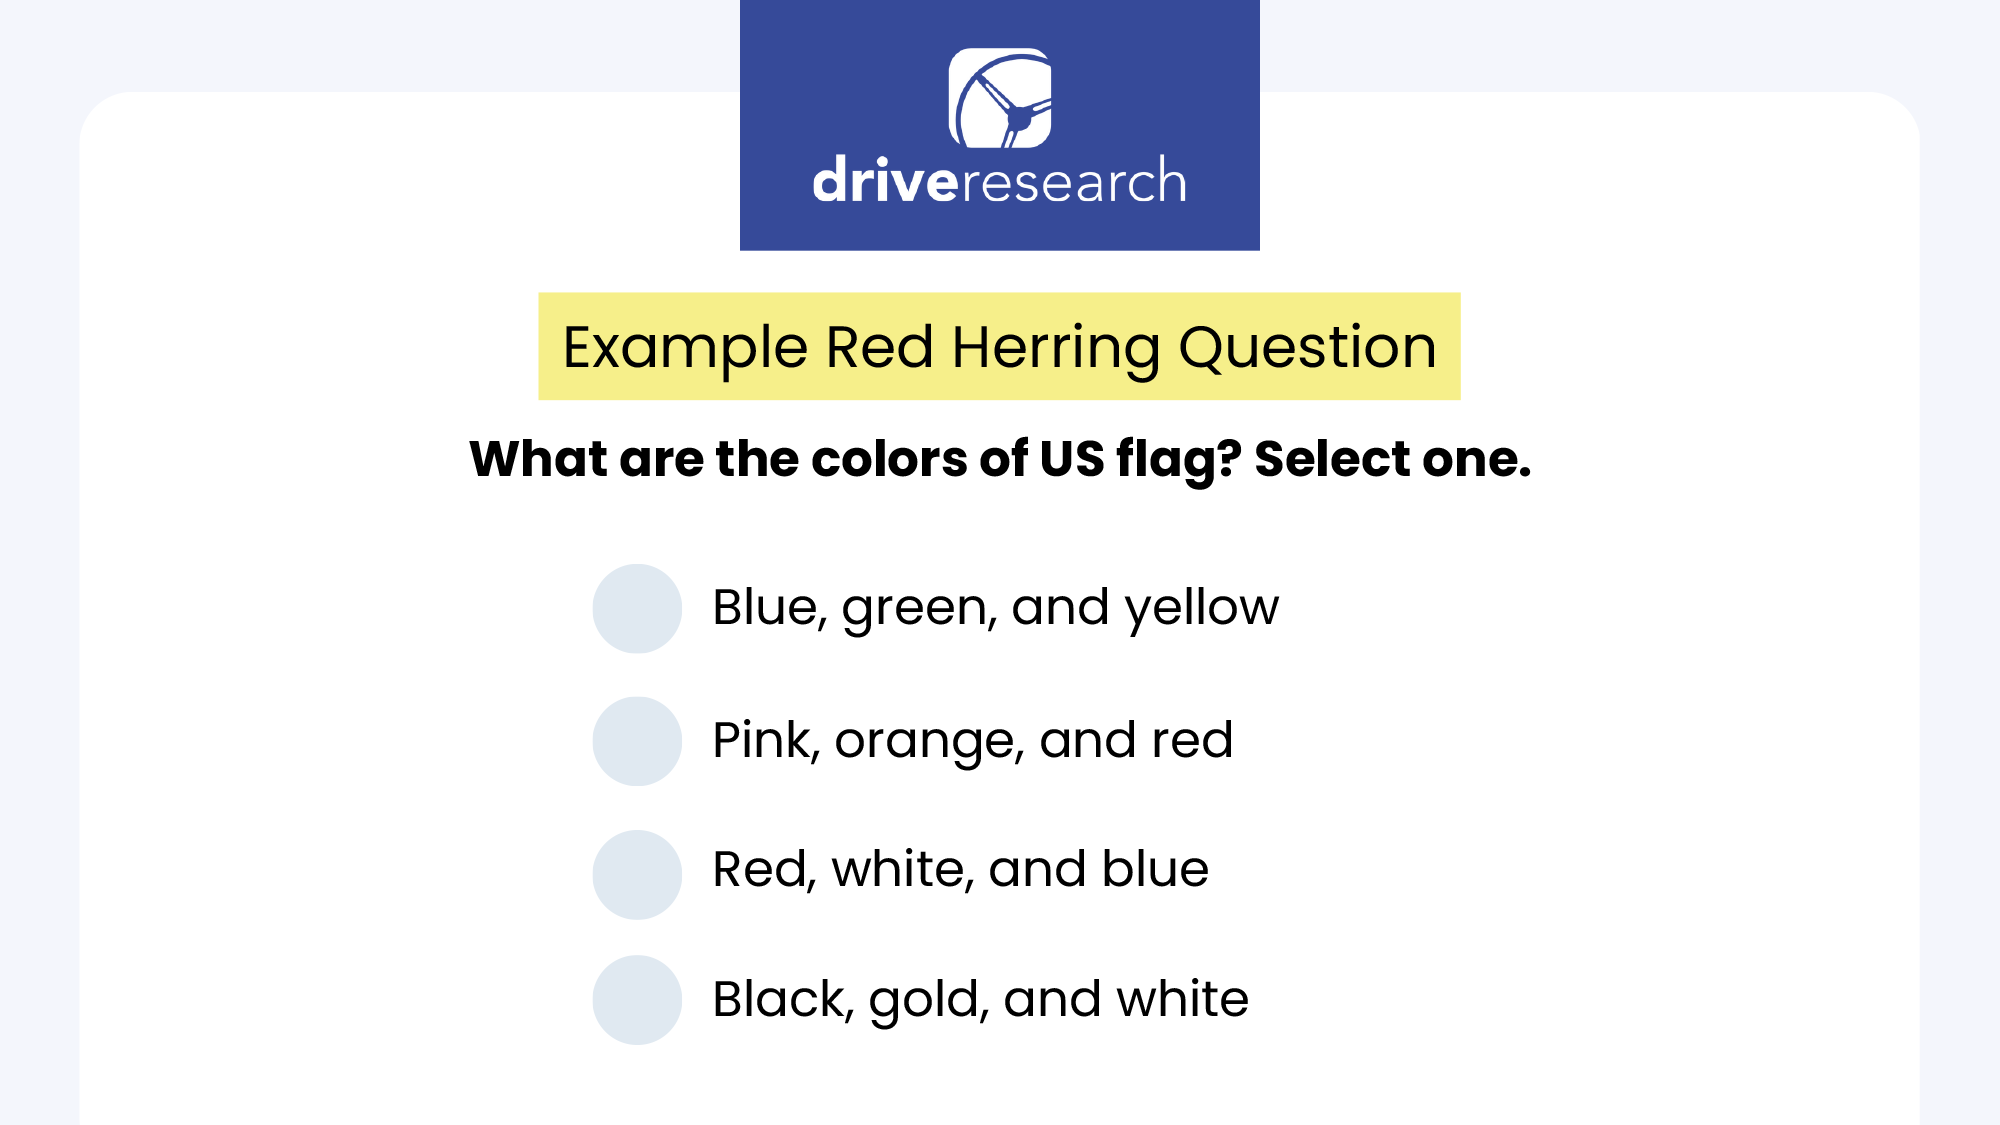 example red herring question to minimize response bias